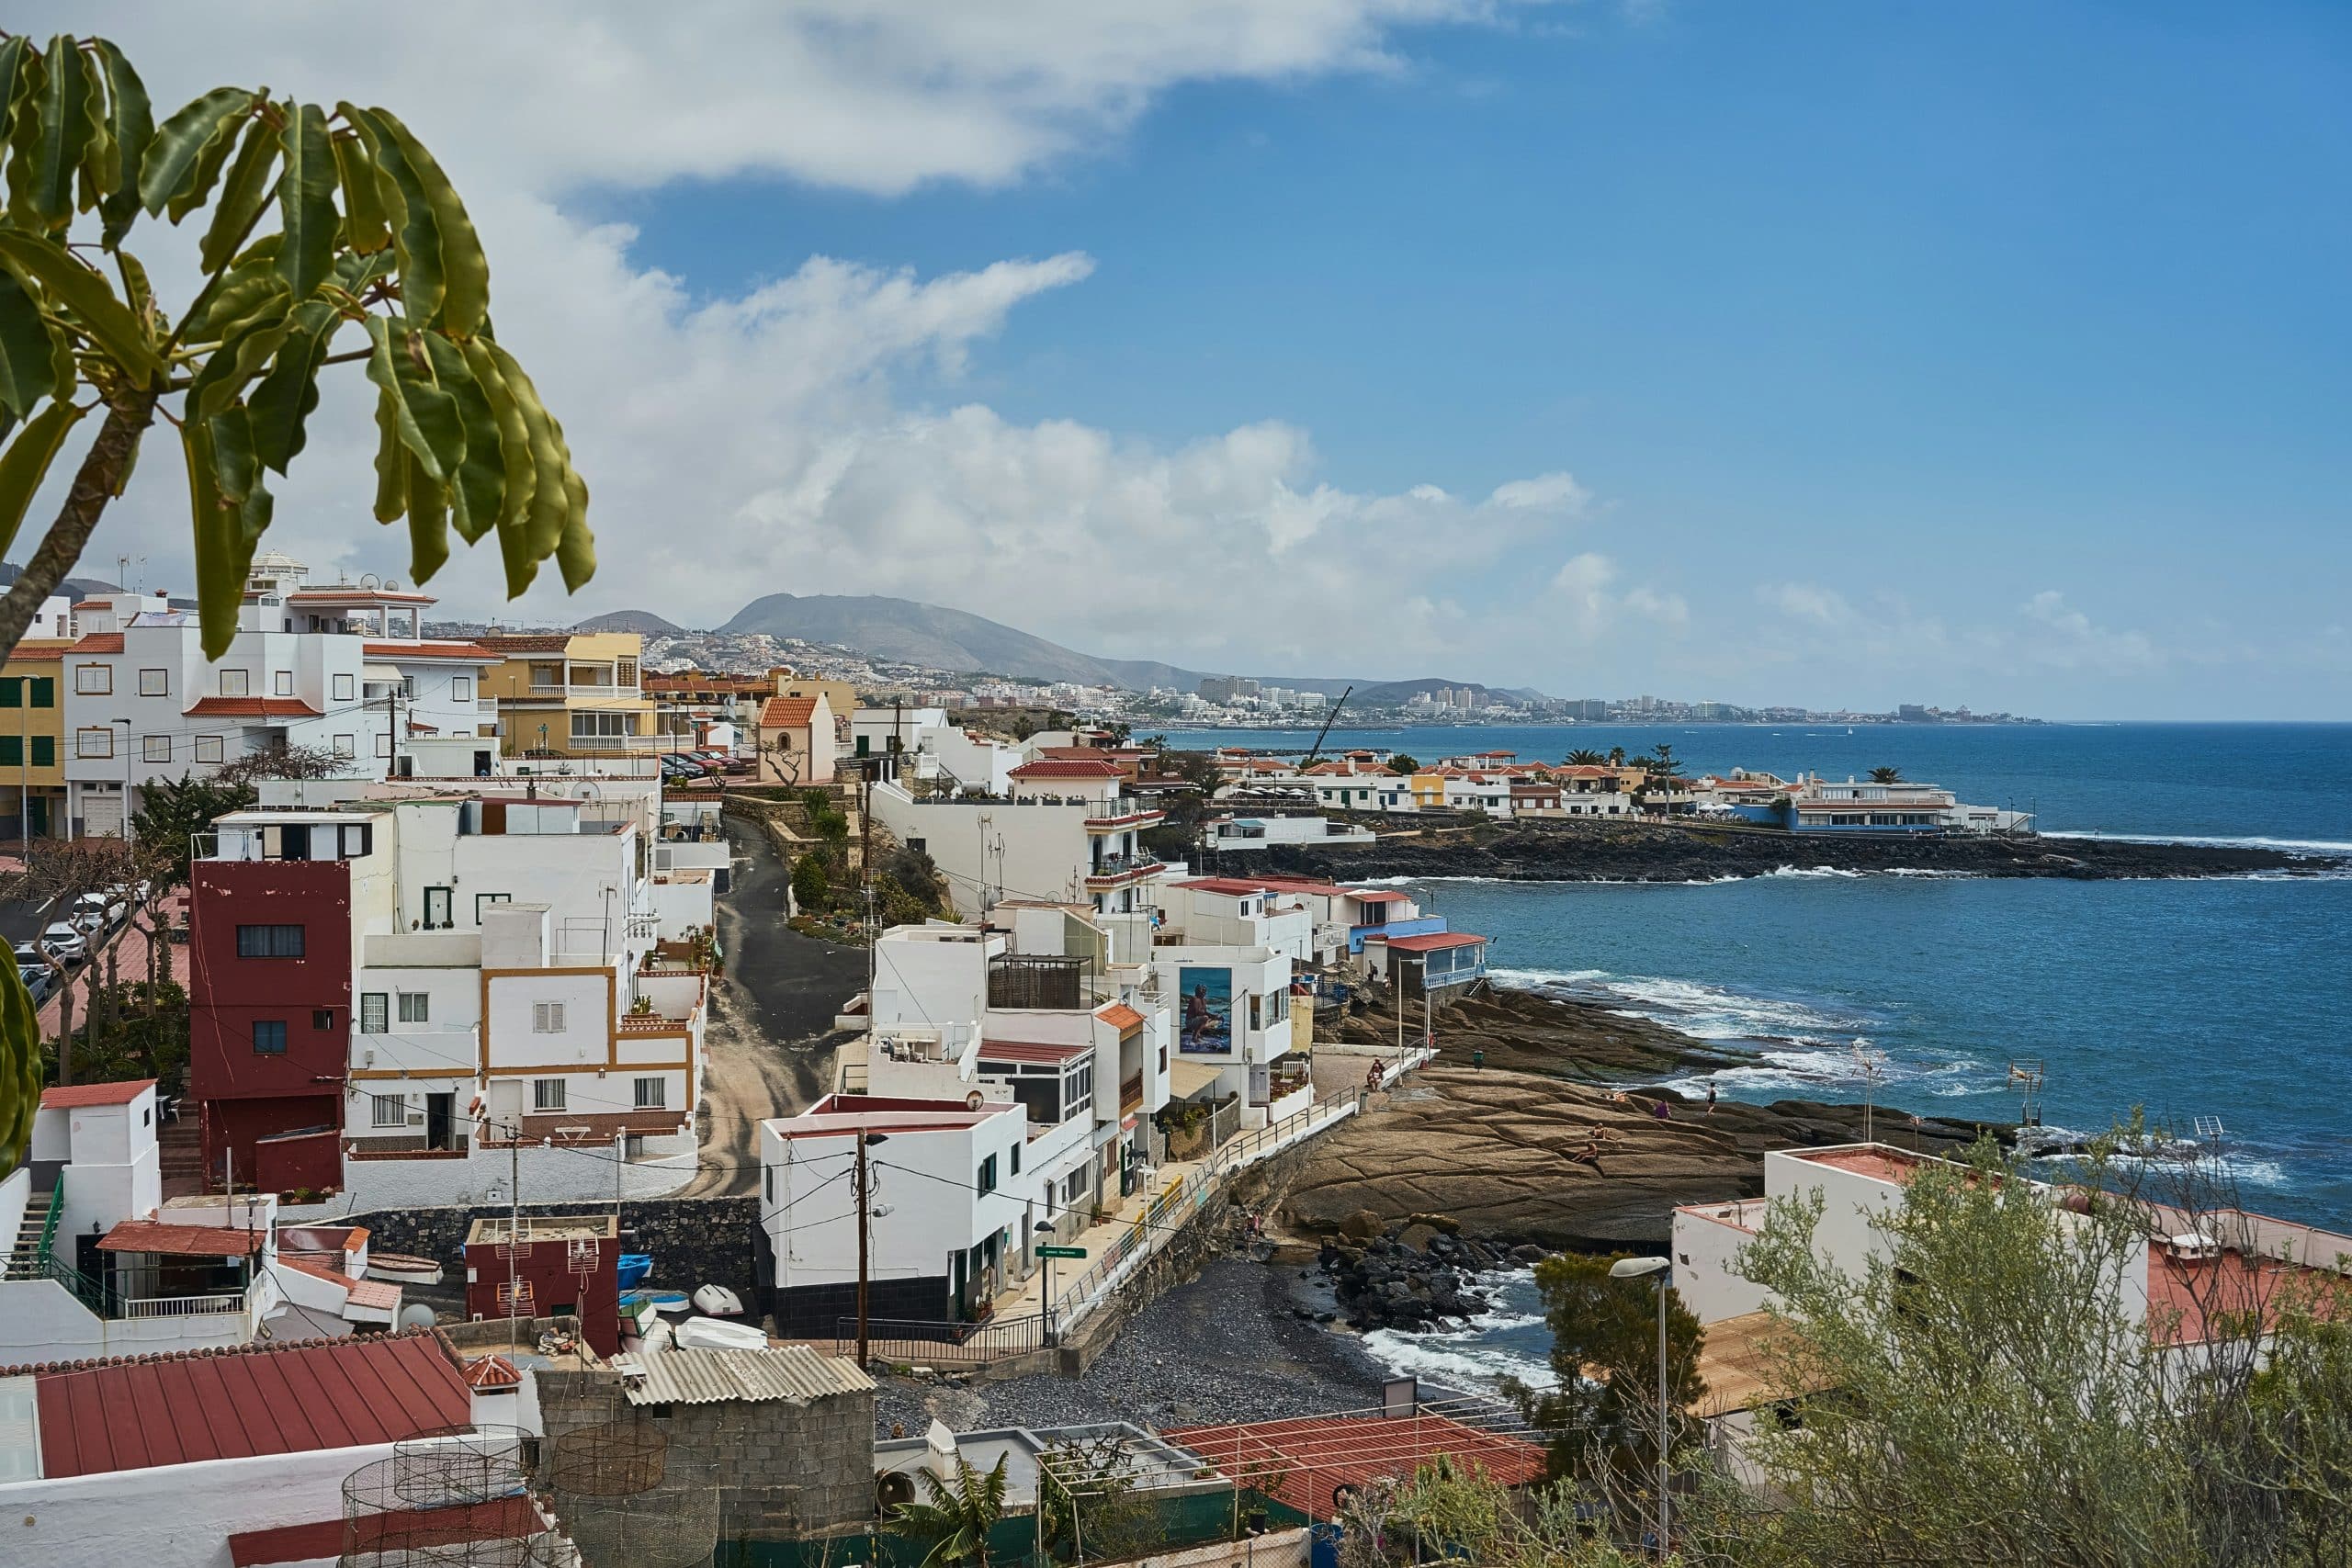 Apartments and houses on the shore of a village on the island of Tenerife - a popular choice for those living in the Canary Islands.